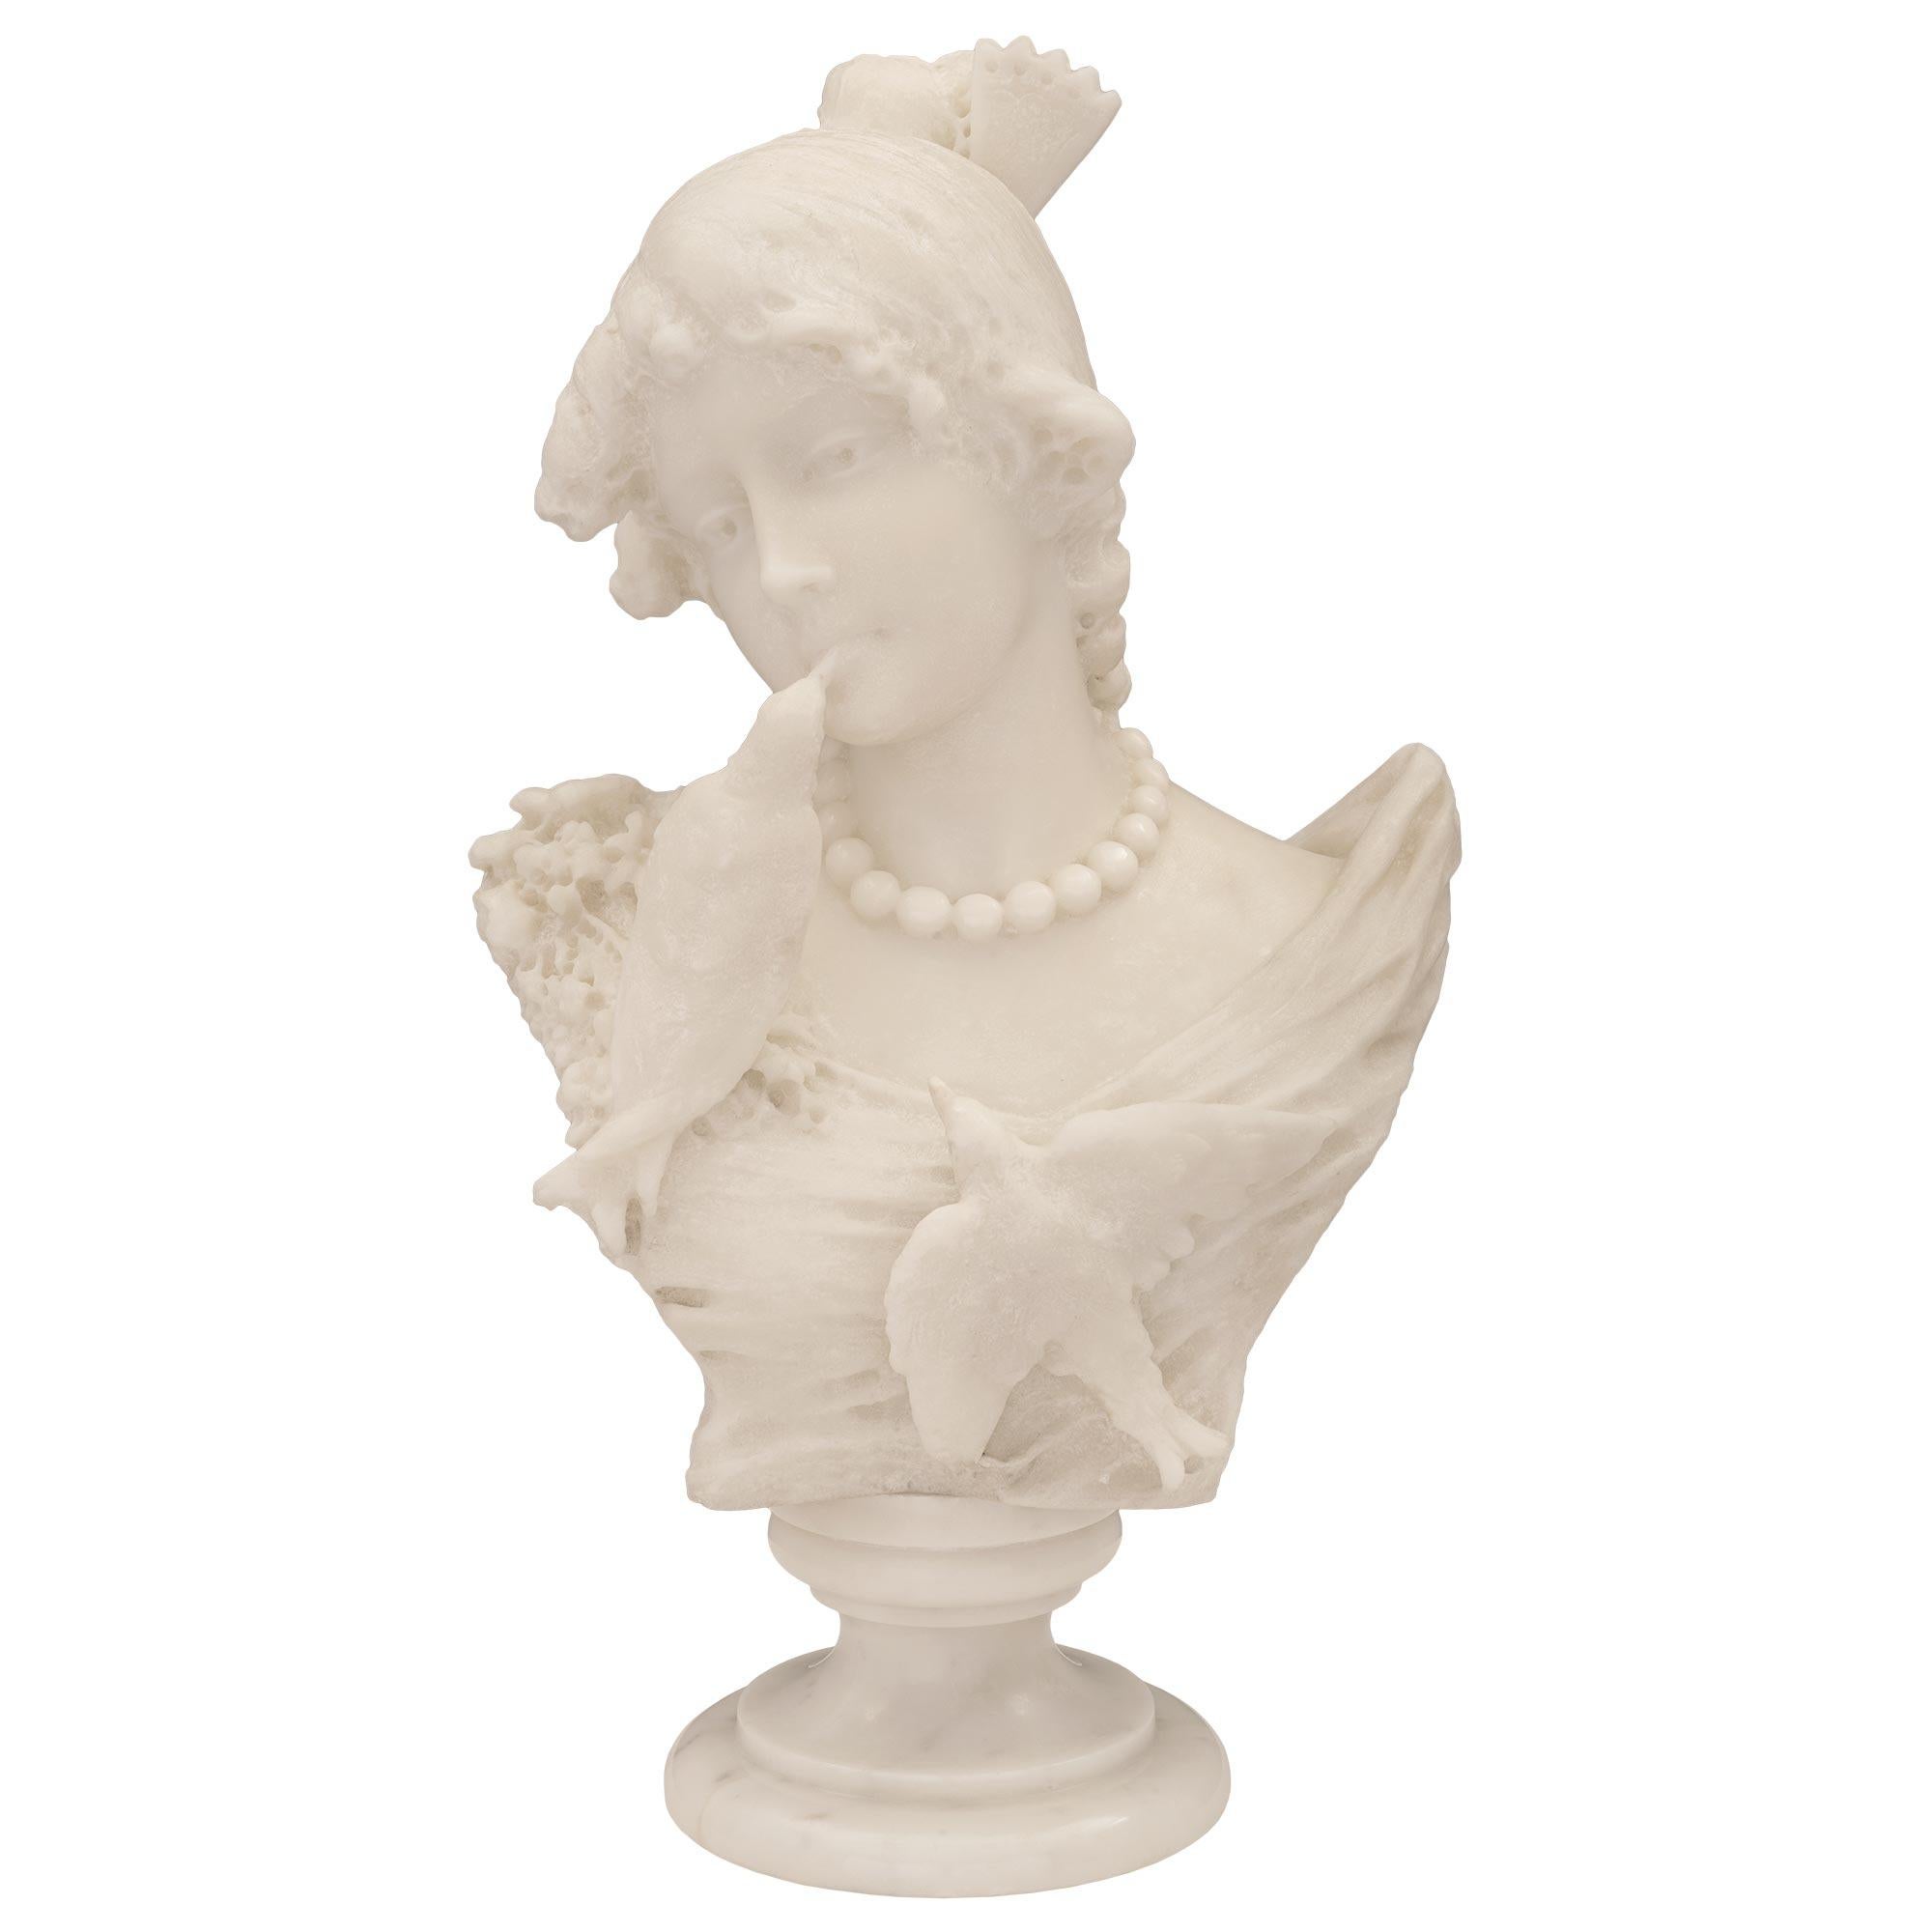 A stunning and extremely high quality Italian 19th century white Carrara marble bust of a young girl with birds. The bust is raised by a circular socle shaped pedestal support with elegant wrap around mottled bands. The wonderfully executed bust